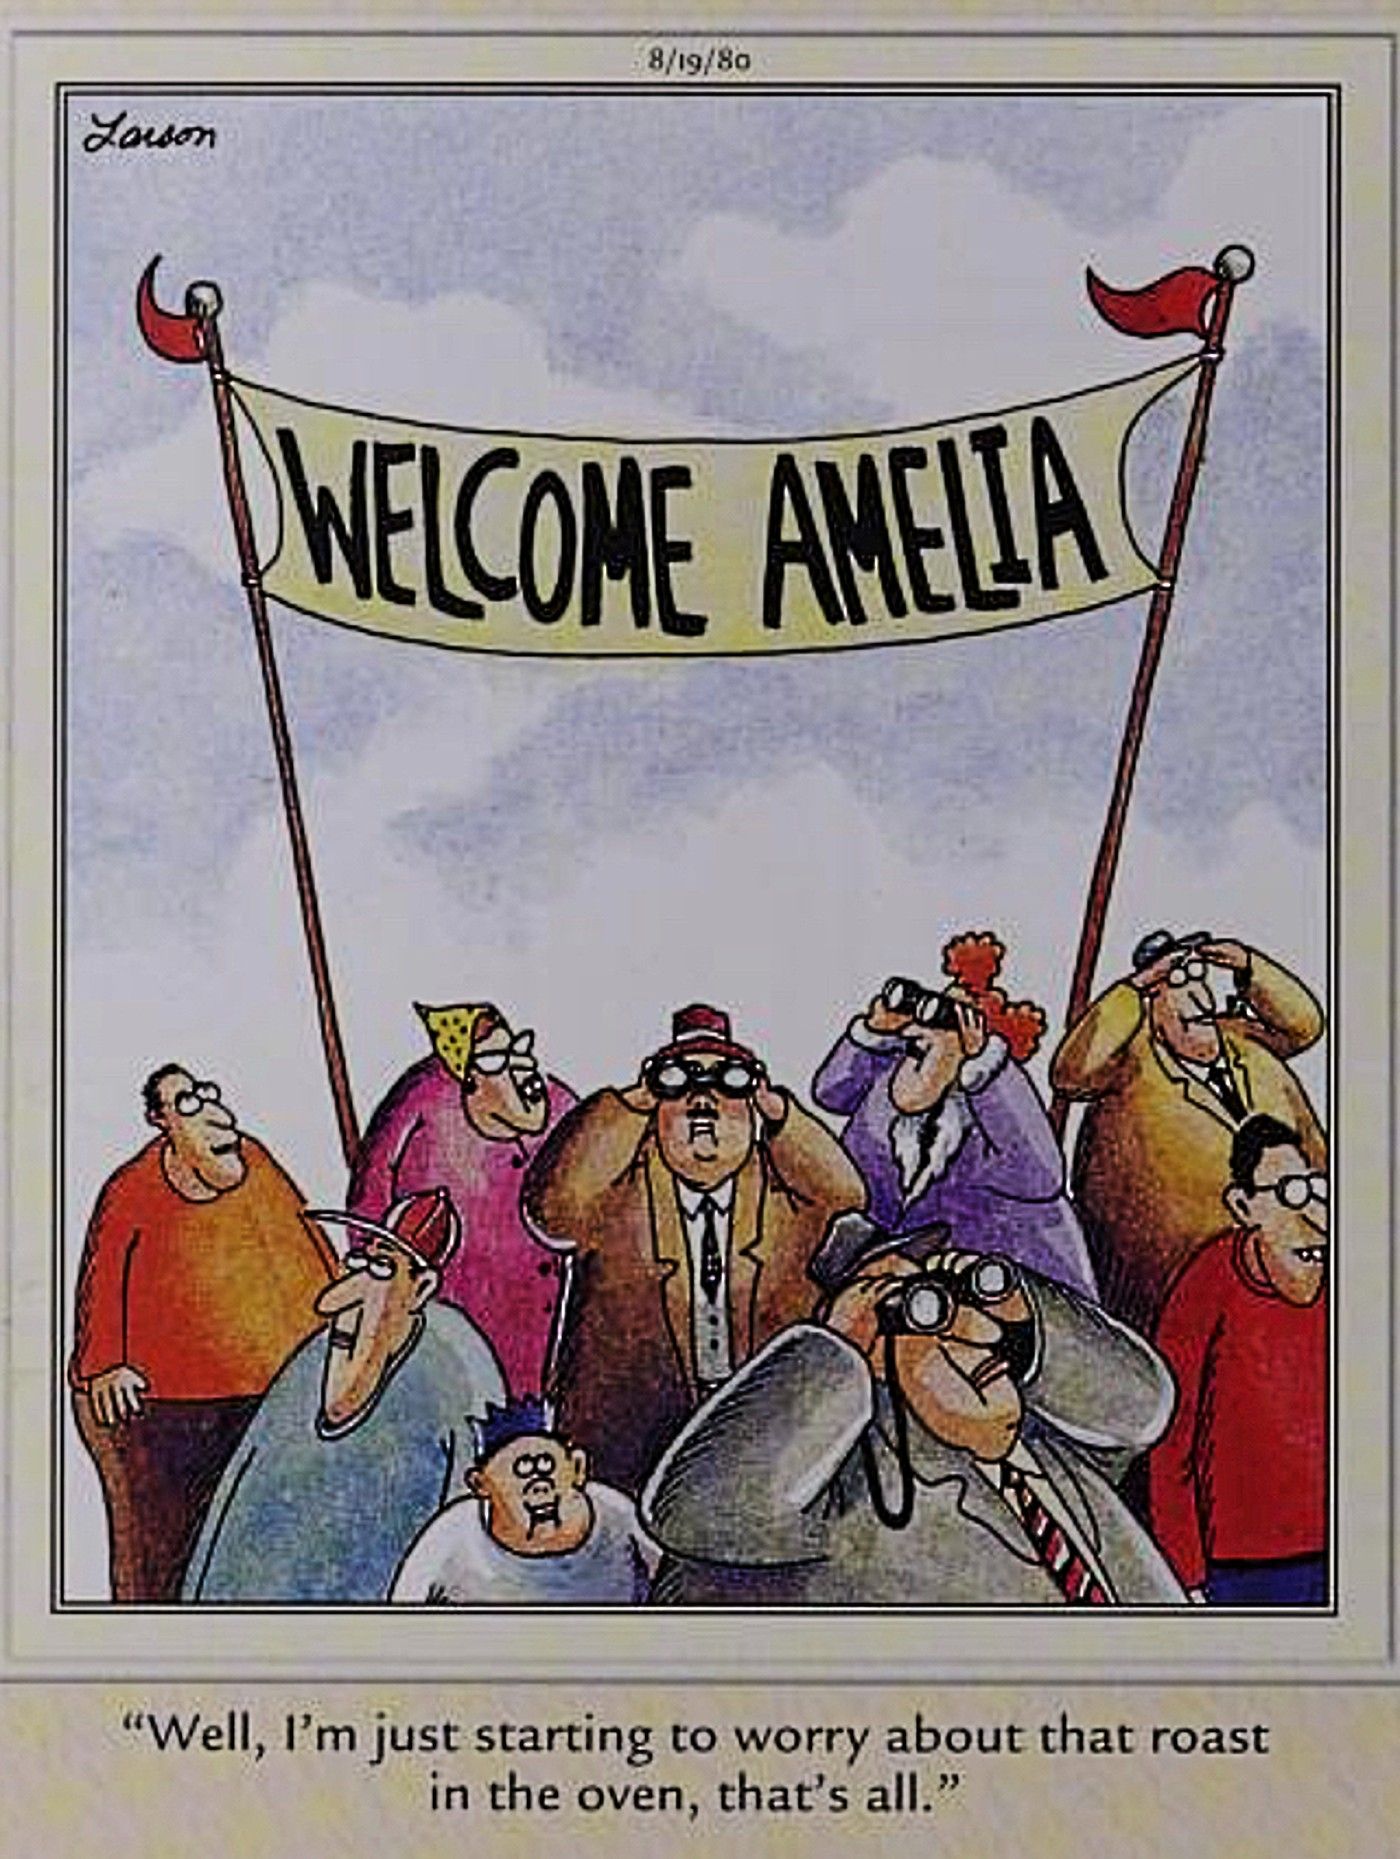 Far Side, Amelia Earhart is late returning from her circumnavigation of the world by plane